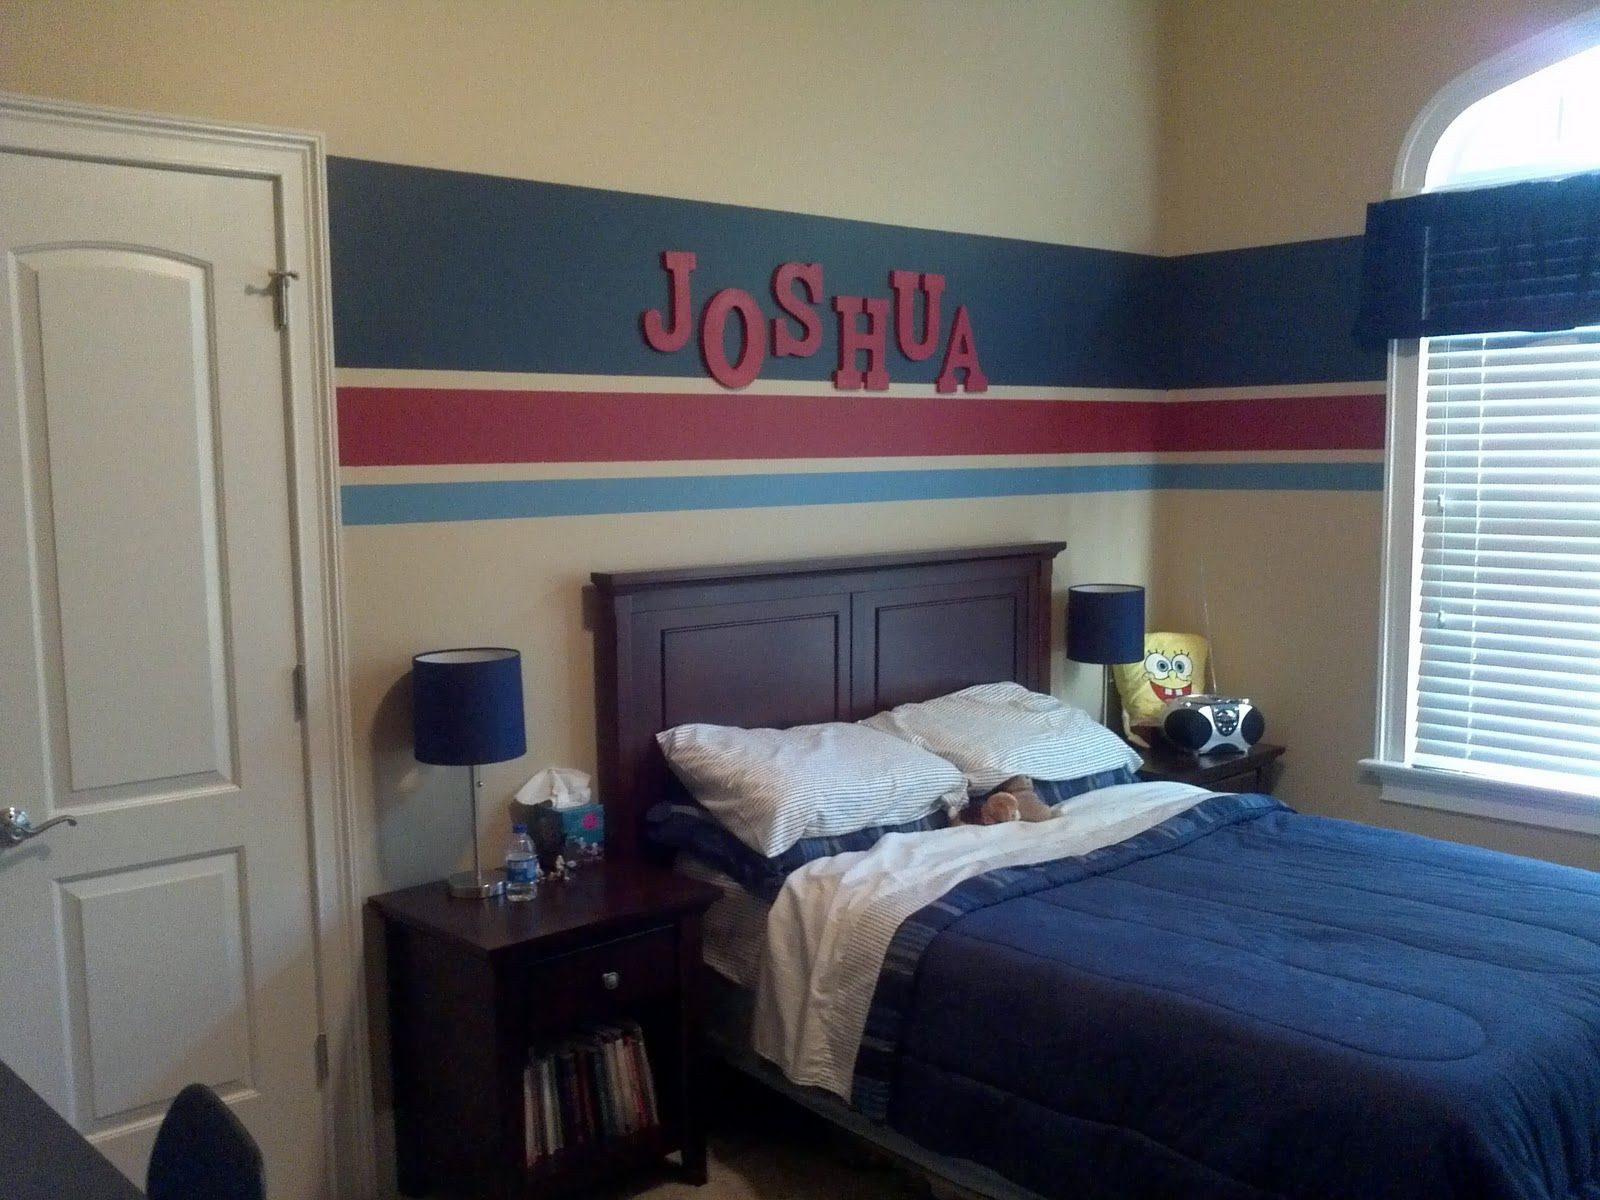 Kids Bedroom Paint Ideas For Walls
 Eat Sleep Decorate Striped Walls Boys Bedroom FINISHED